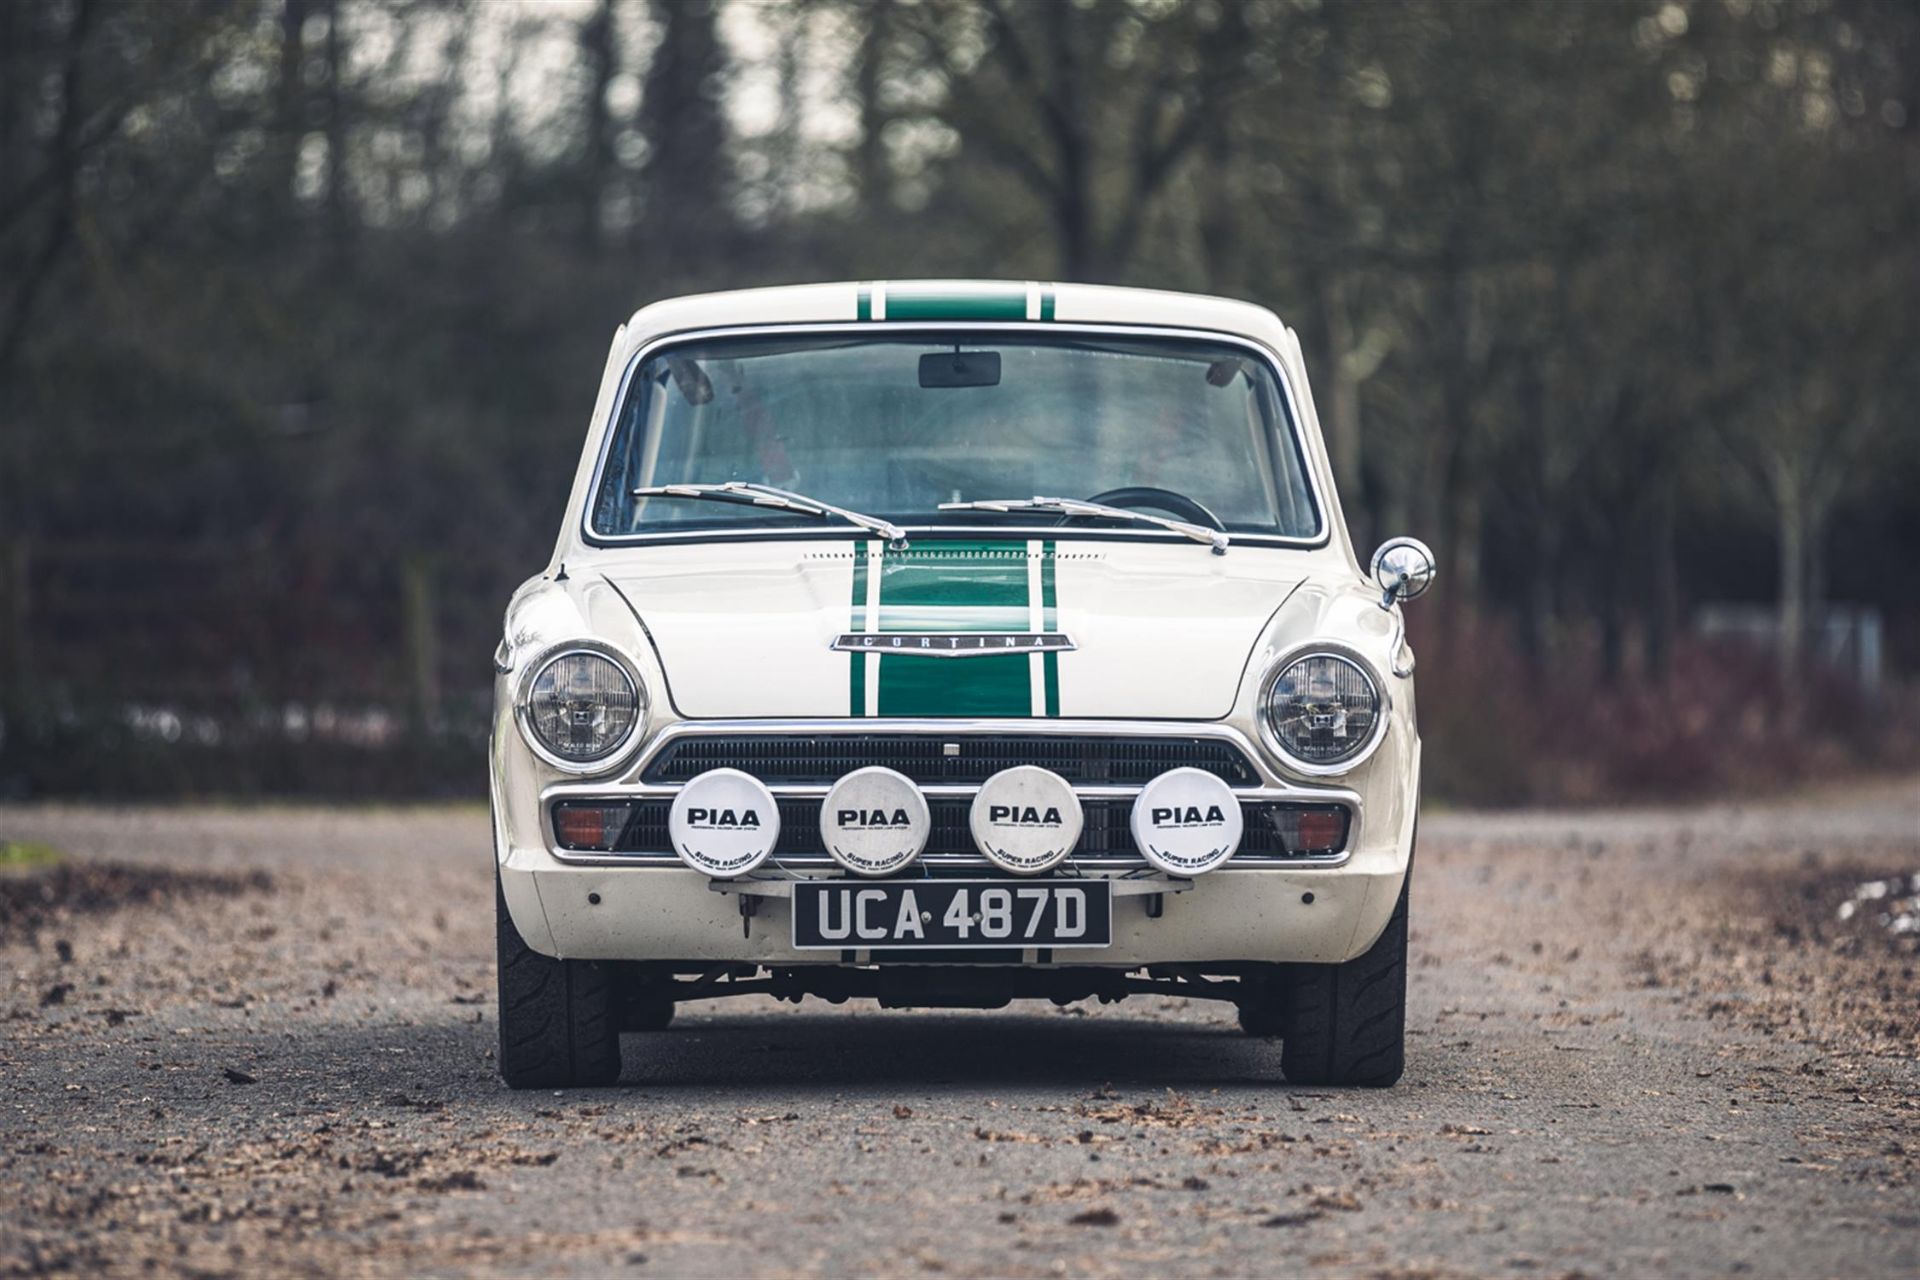 1966 Ford Cortina GT (Mk1) Four-Door Rally Car (LHD) - Image 6 of 10